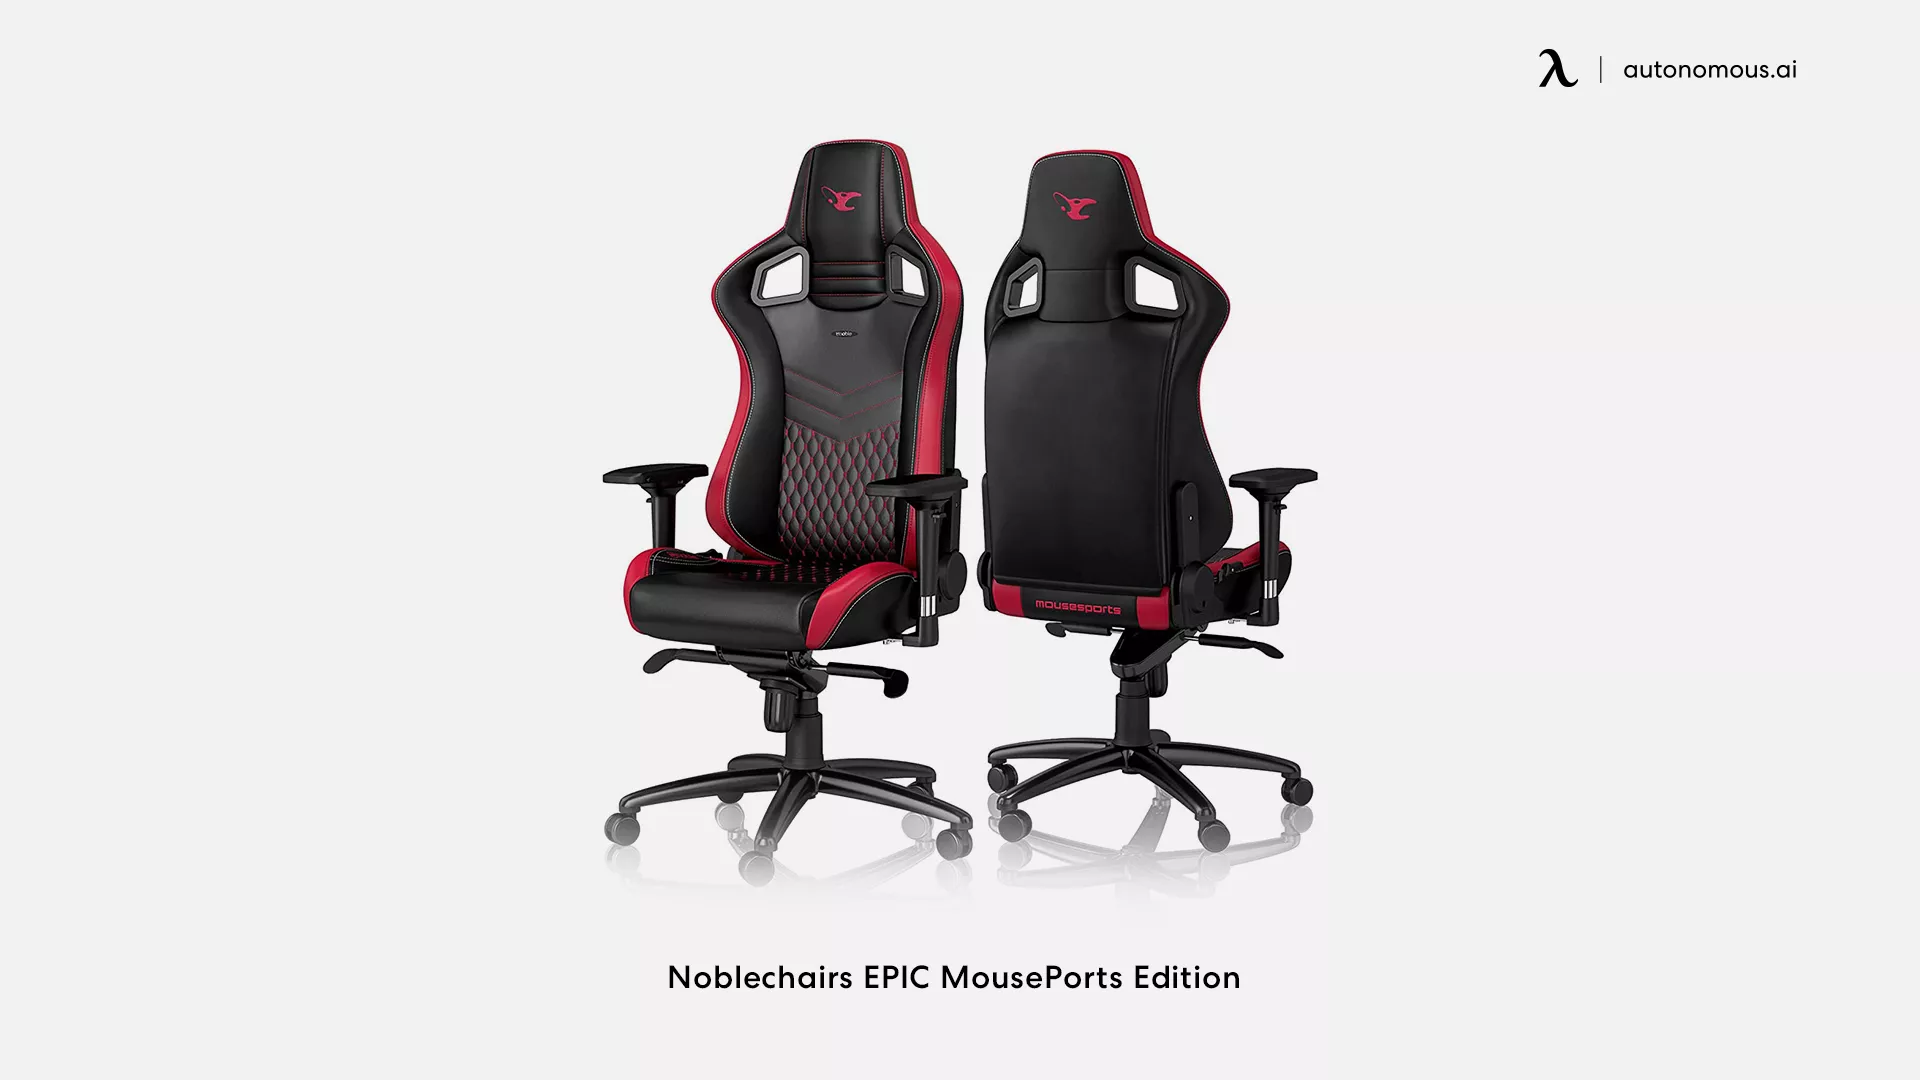 Noblechairs EPIC MousePorts Edition